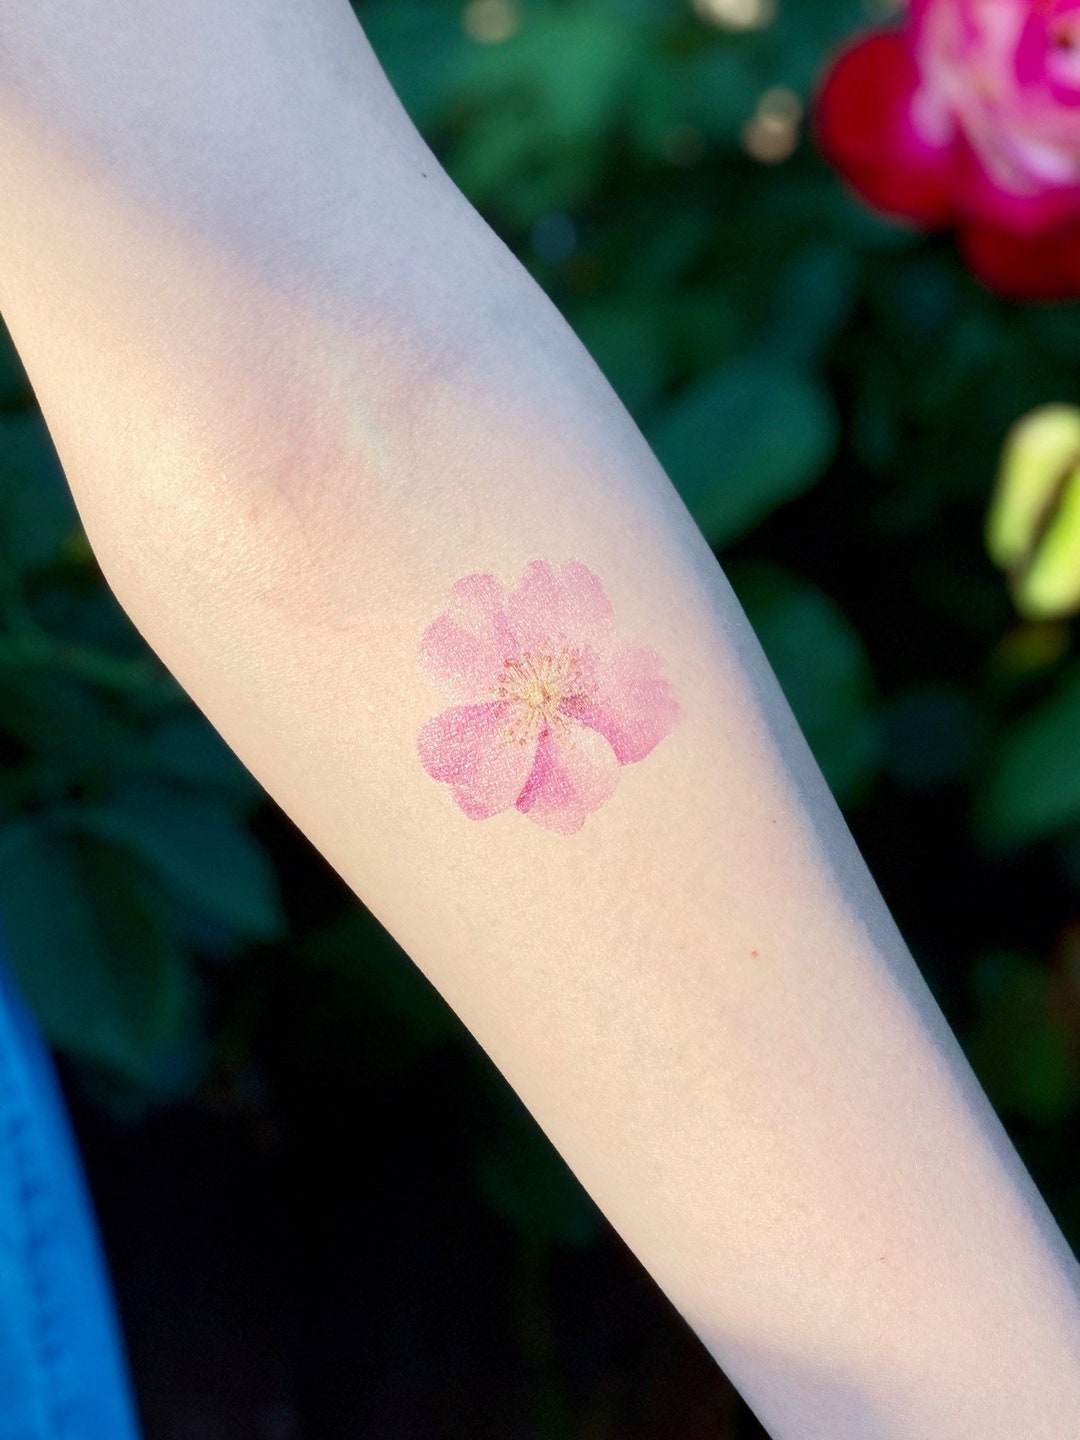 Uncover The Deep Meaning Of A Cherry Blossom Tattoo - Cultura Colectiva